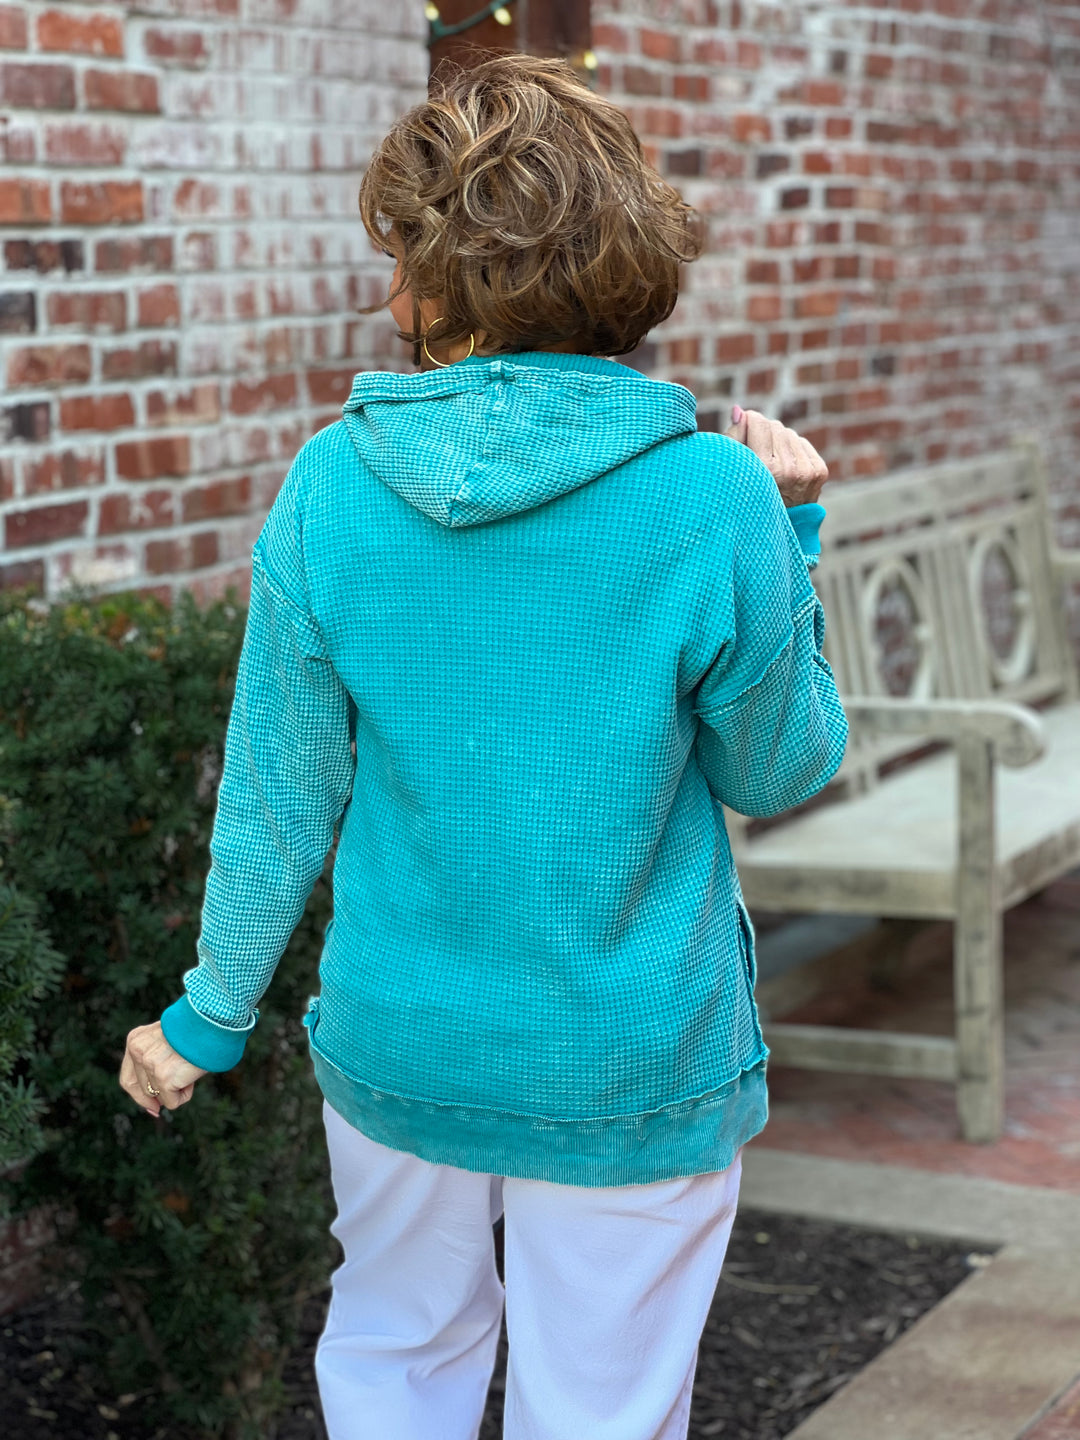 Washed Waffle 3 Button Neckline Hooded Top - 2 Color Options